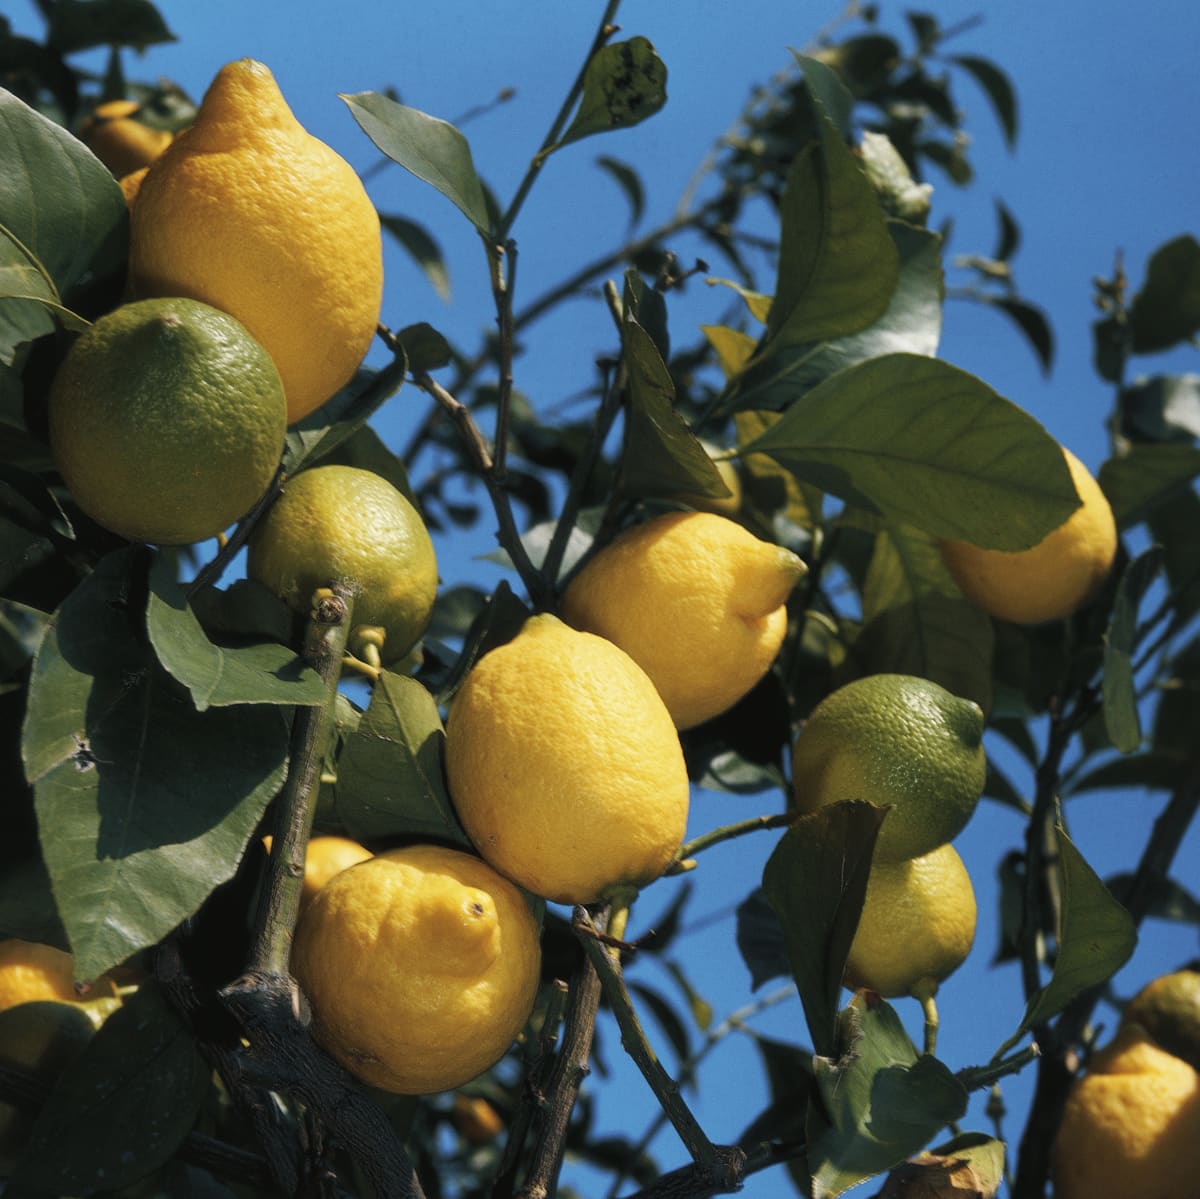 UNSPECIFIED - JANUARY 27: Lemons (Citrus limon), Rutaceae. (Photo by DeAgostini/Getty Images)